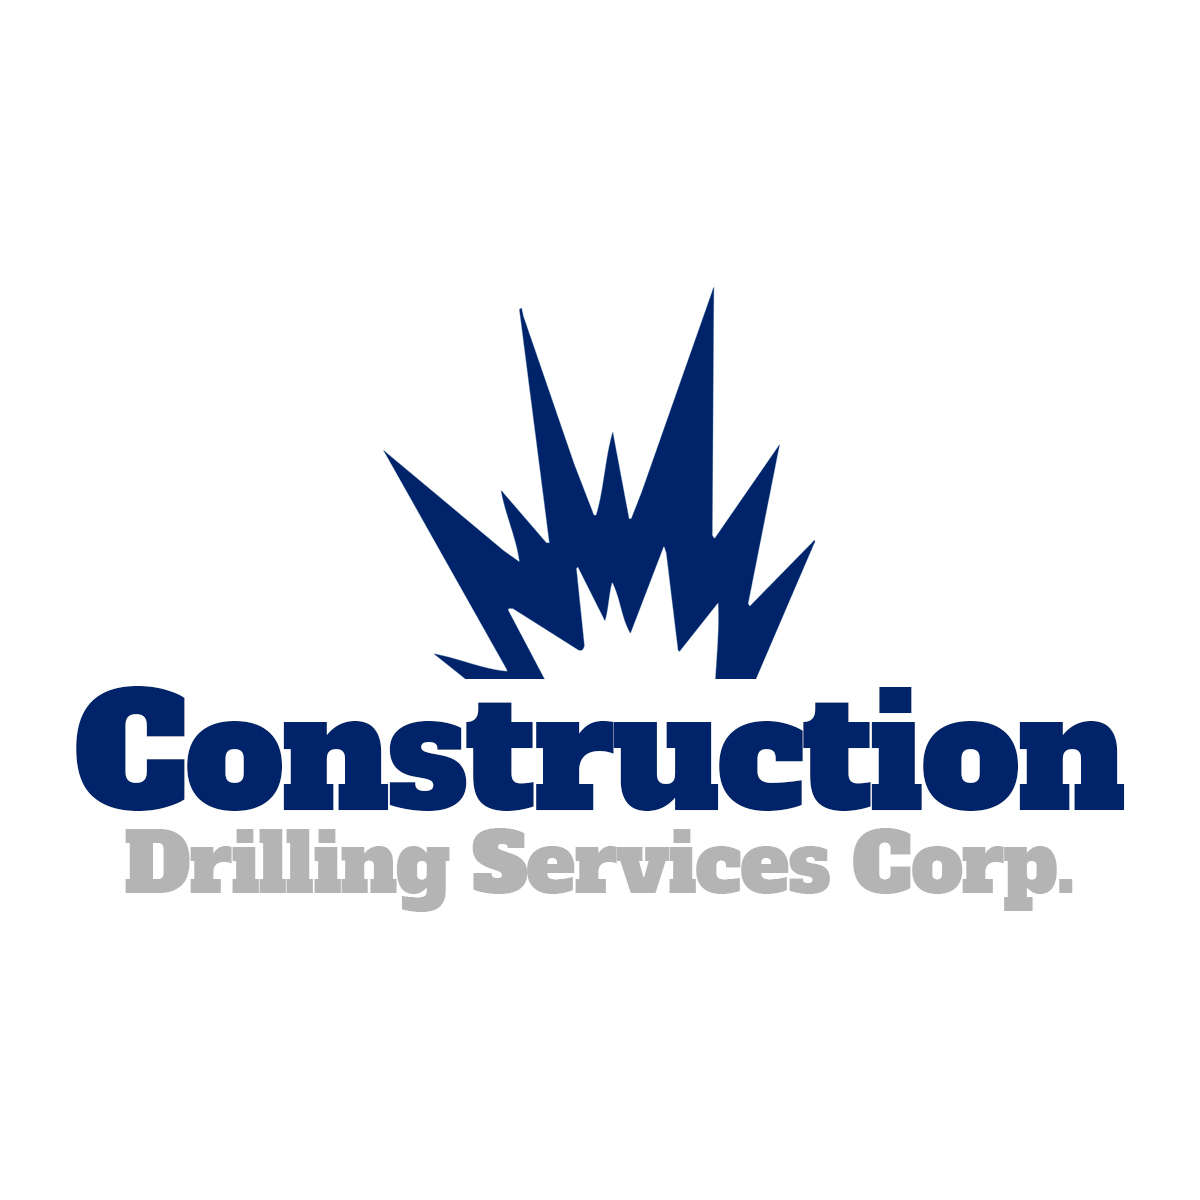 Construction Drilling Services Corp. Logo